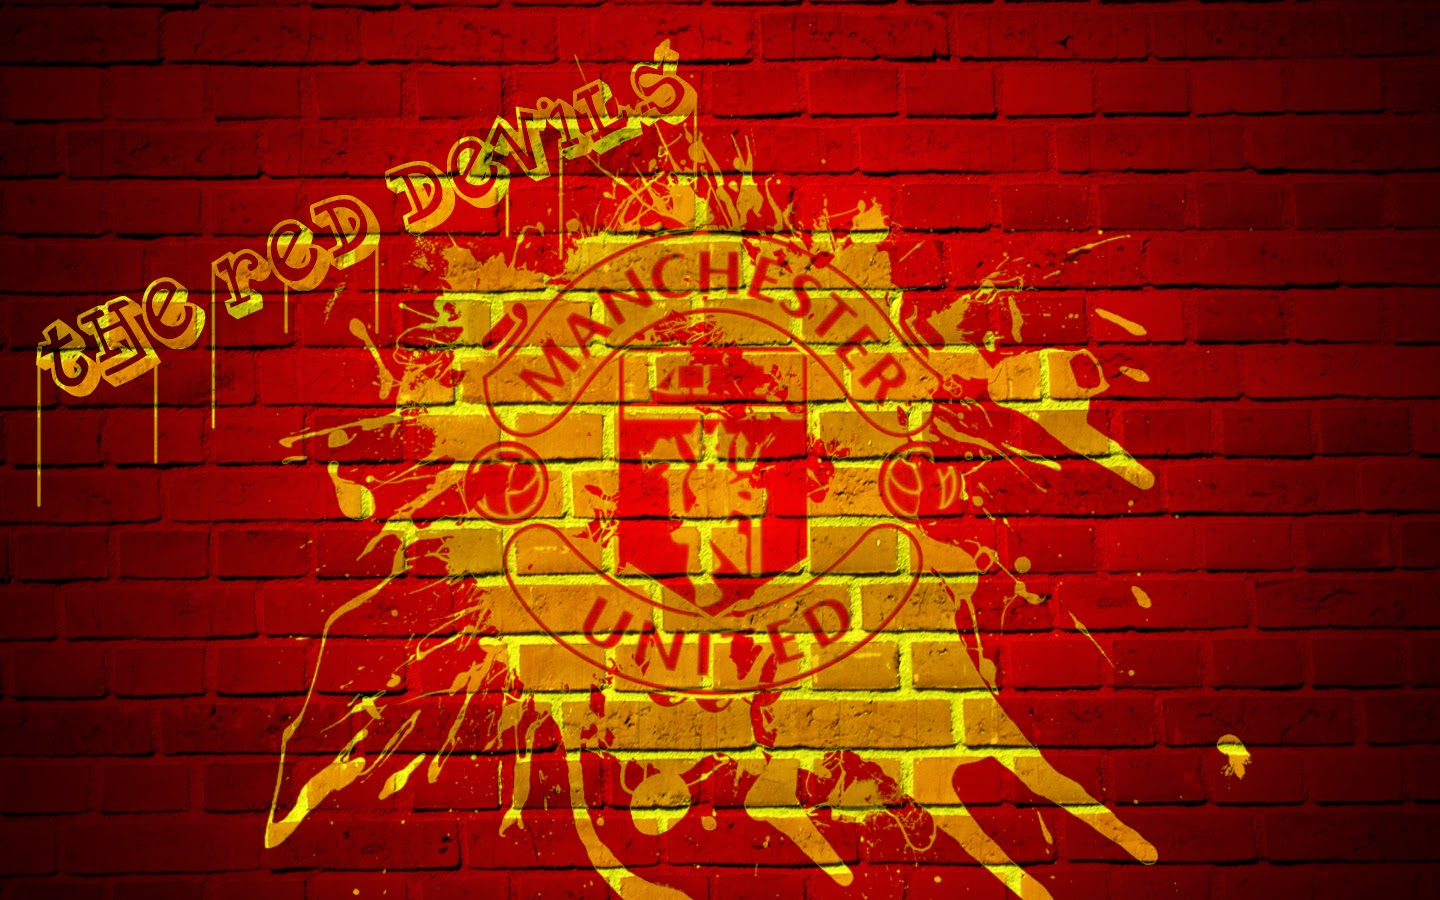 manchester united wallpaper for bedroom,red,text,font,graphics,art